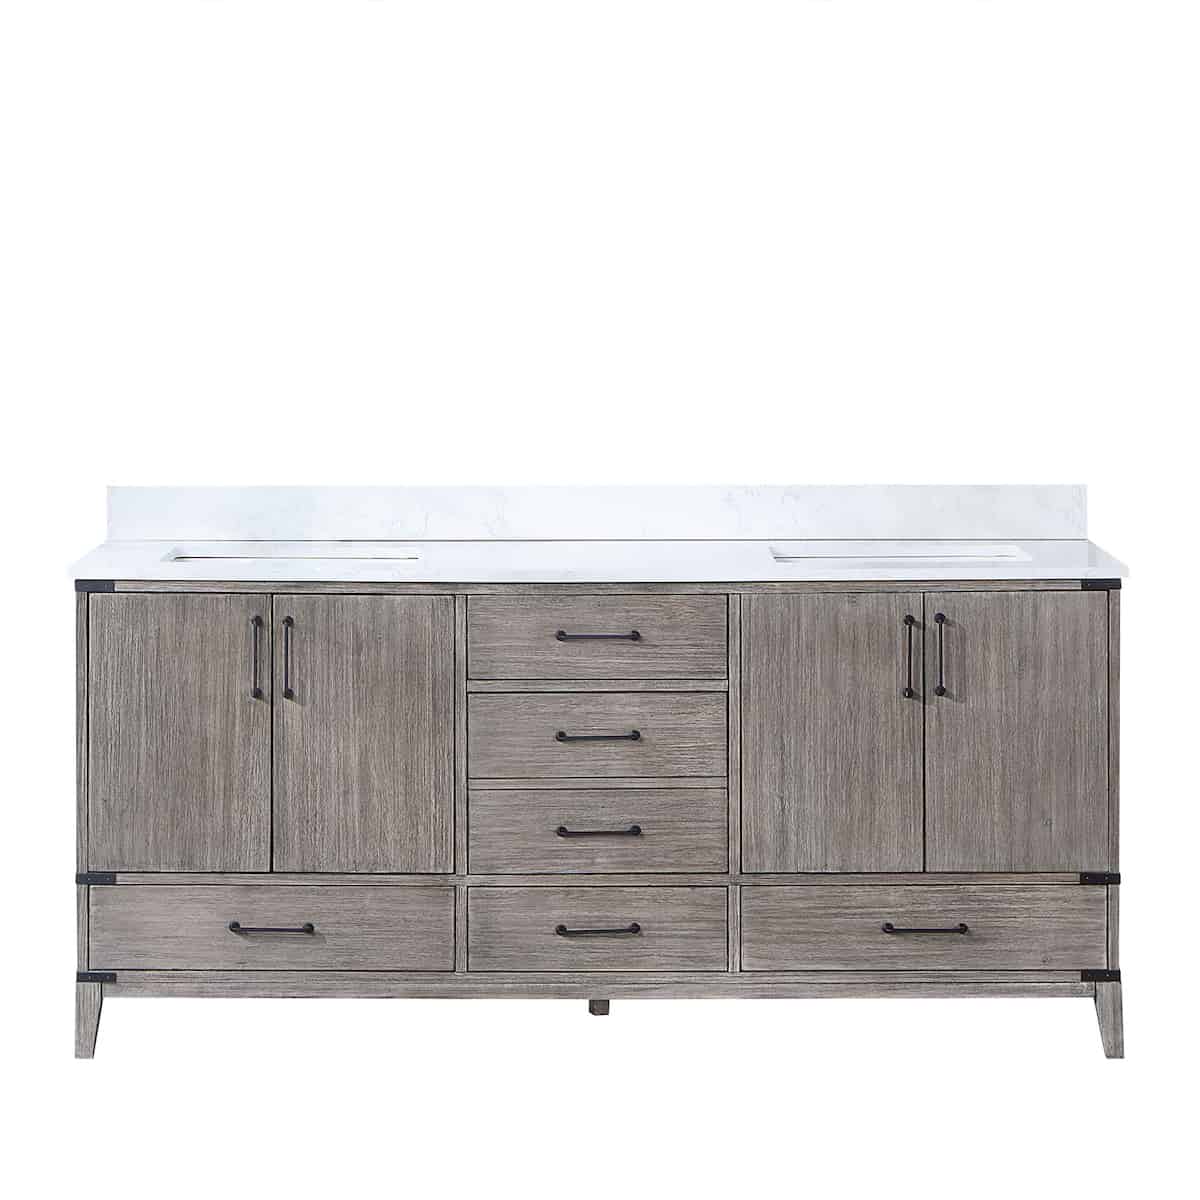 Vinnova Zaragoza 72 Inch Freestanding Double Sink Bath Vanity in Classical Grey With White Composite Grain Stone Countertop Without Mirror 799072-CR-GW-NM